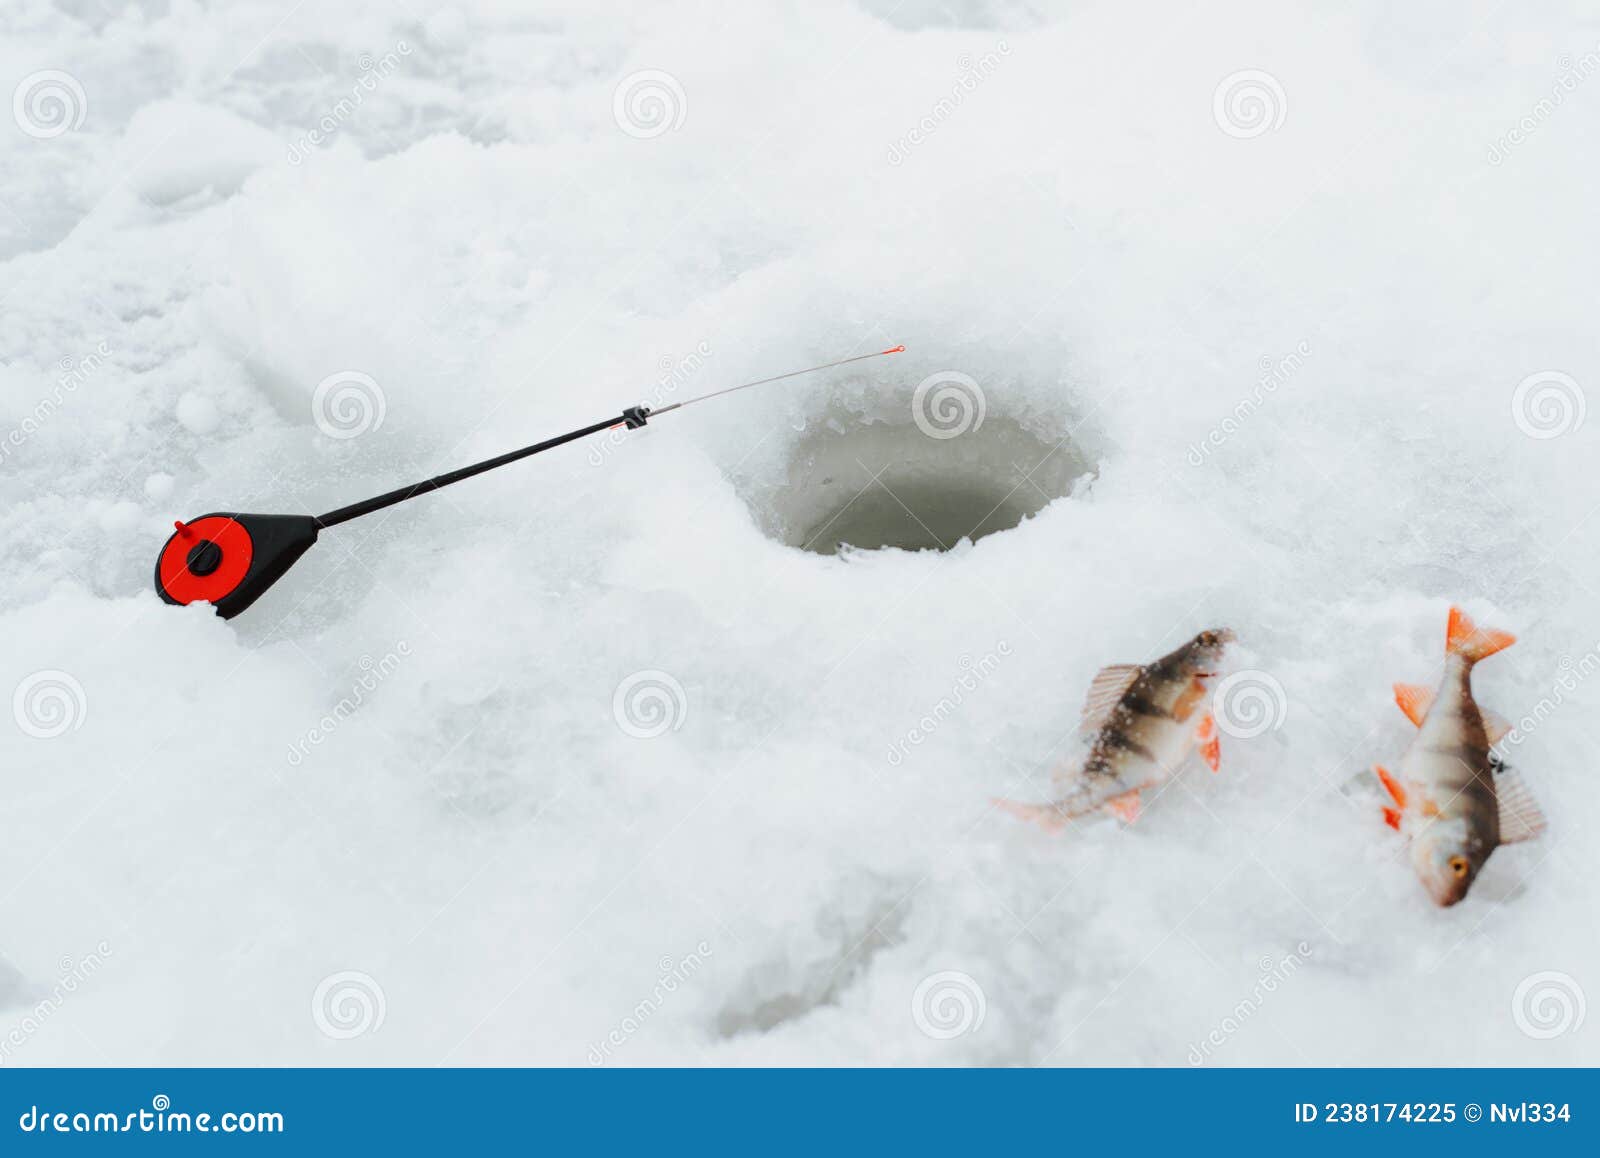 Fish and Small Ice Fishing Rod Near Hole in Frozen Water, Outdoors. Winter  Hobby Sport, Active Leisure Concept Stock Image - Image of season,  recreational: 238174225